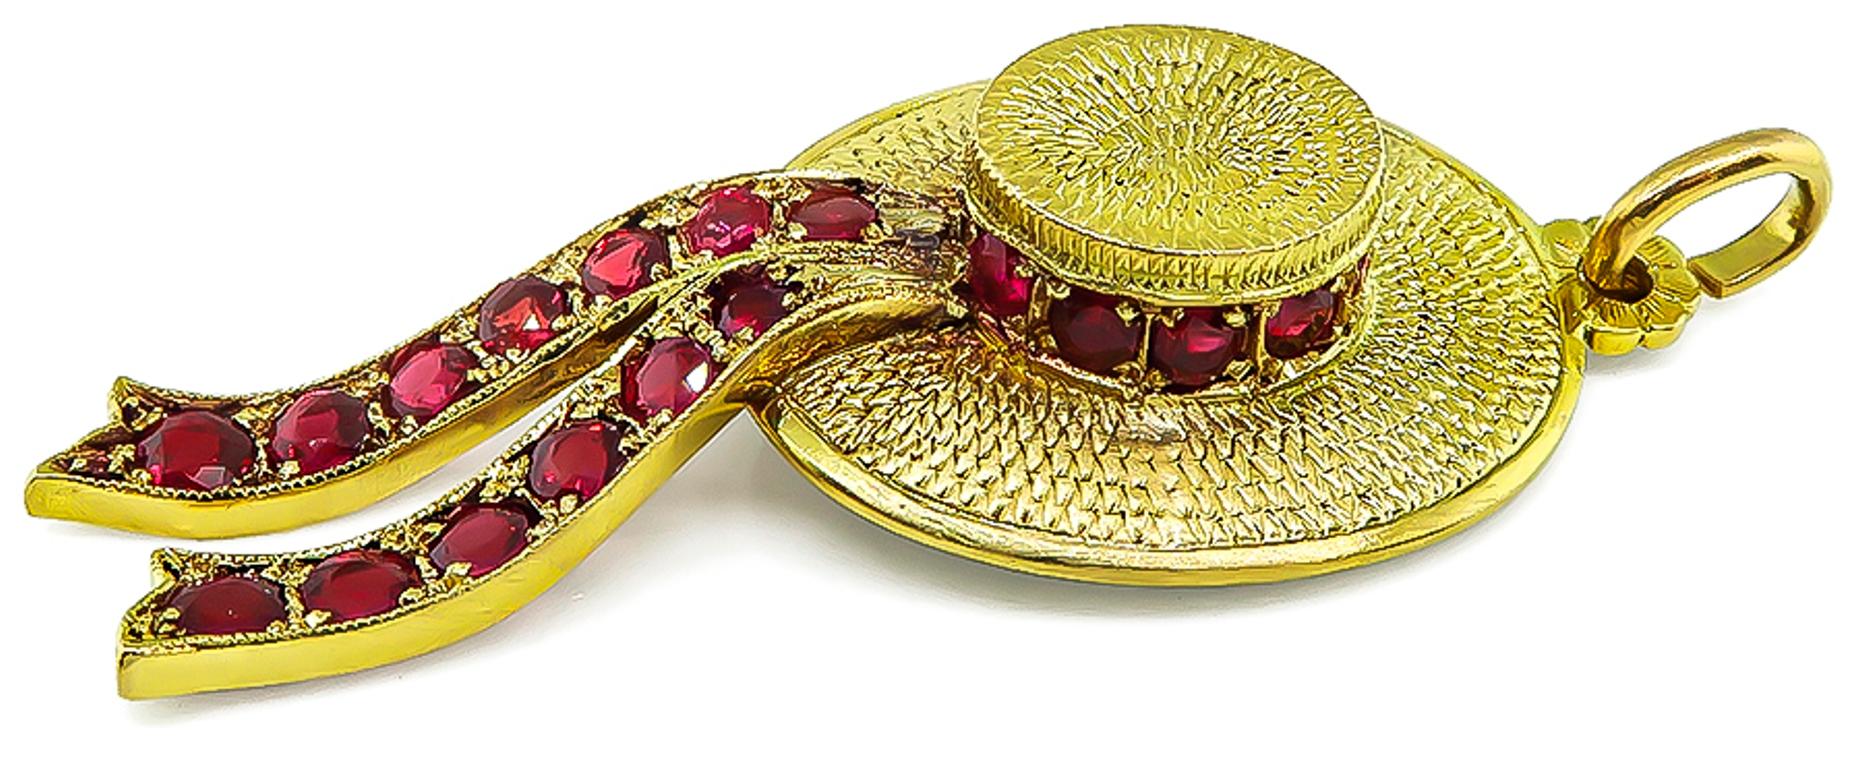 This elegant 18k yellow gold hat pendant by Nardi is set with lovely round cut rubies that weigh approximately 3.00ct. The pendant measures 53mm by 21mm and weighs 8.5 grams. It is signed NARDI 750.


Inventory #27881RBS